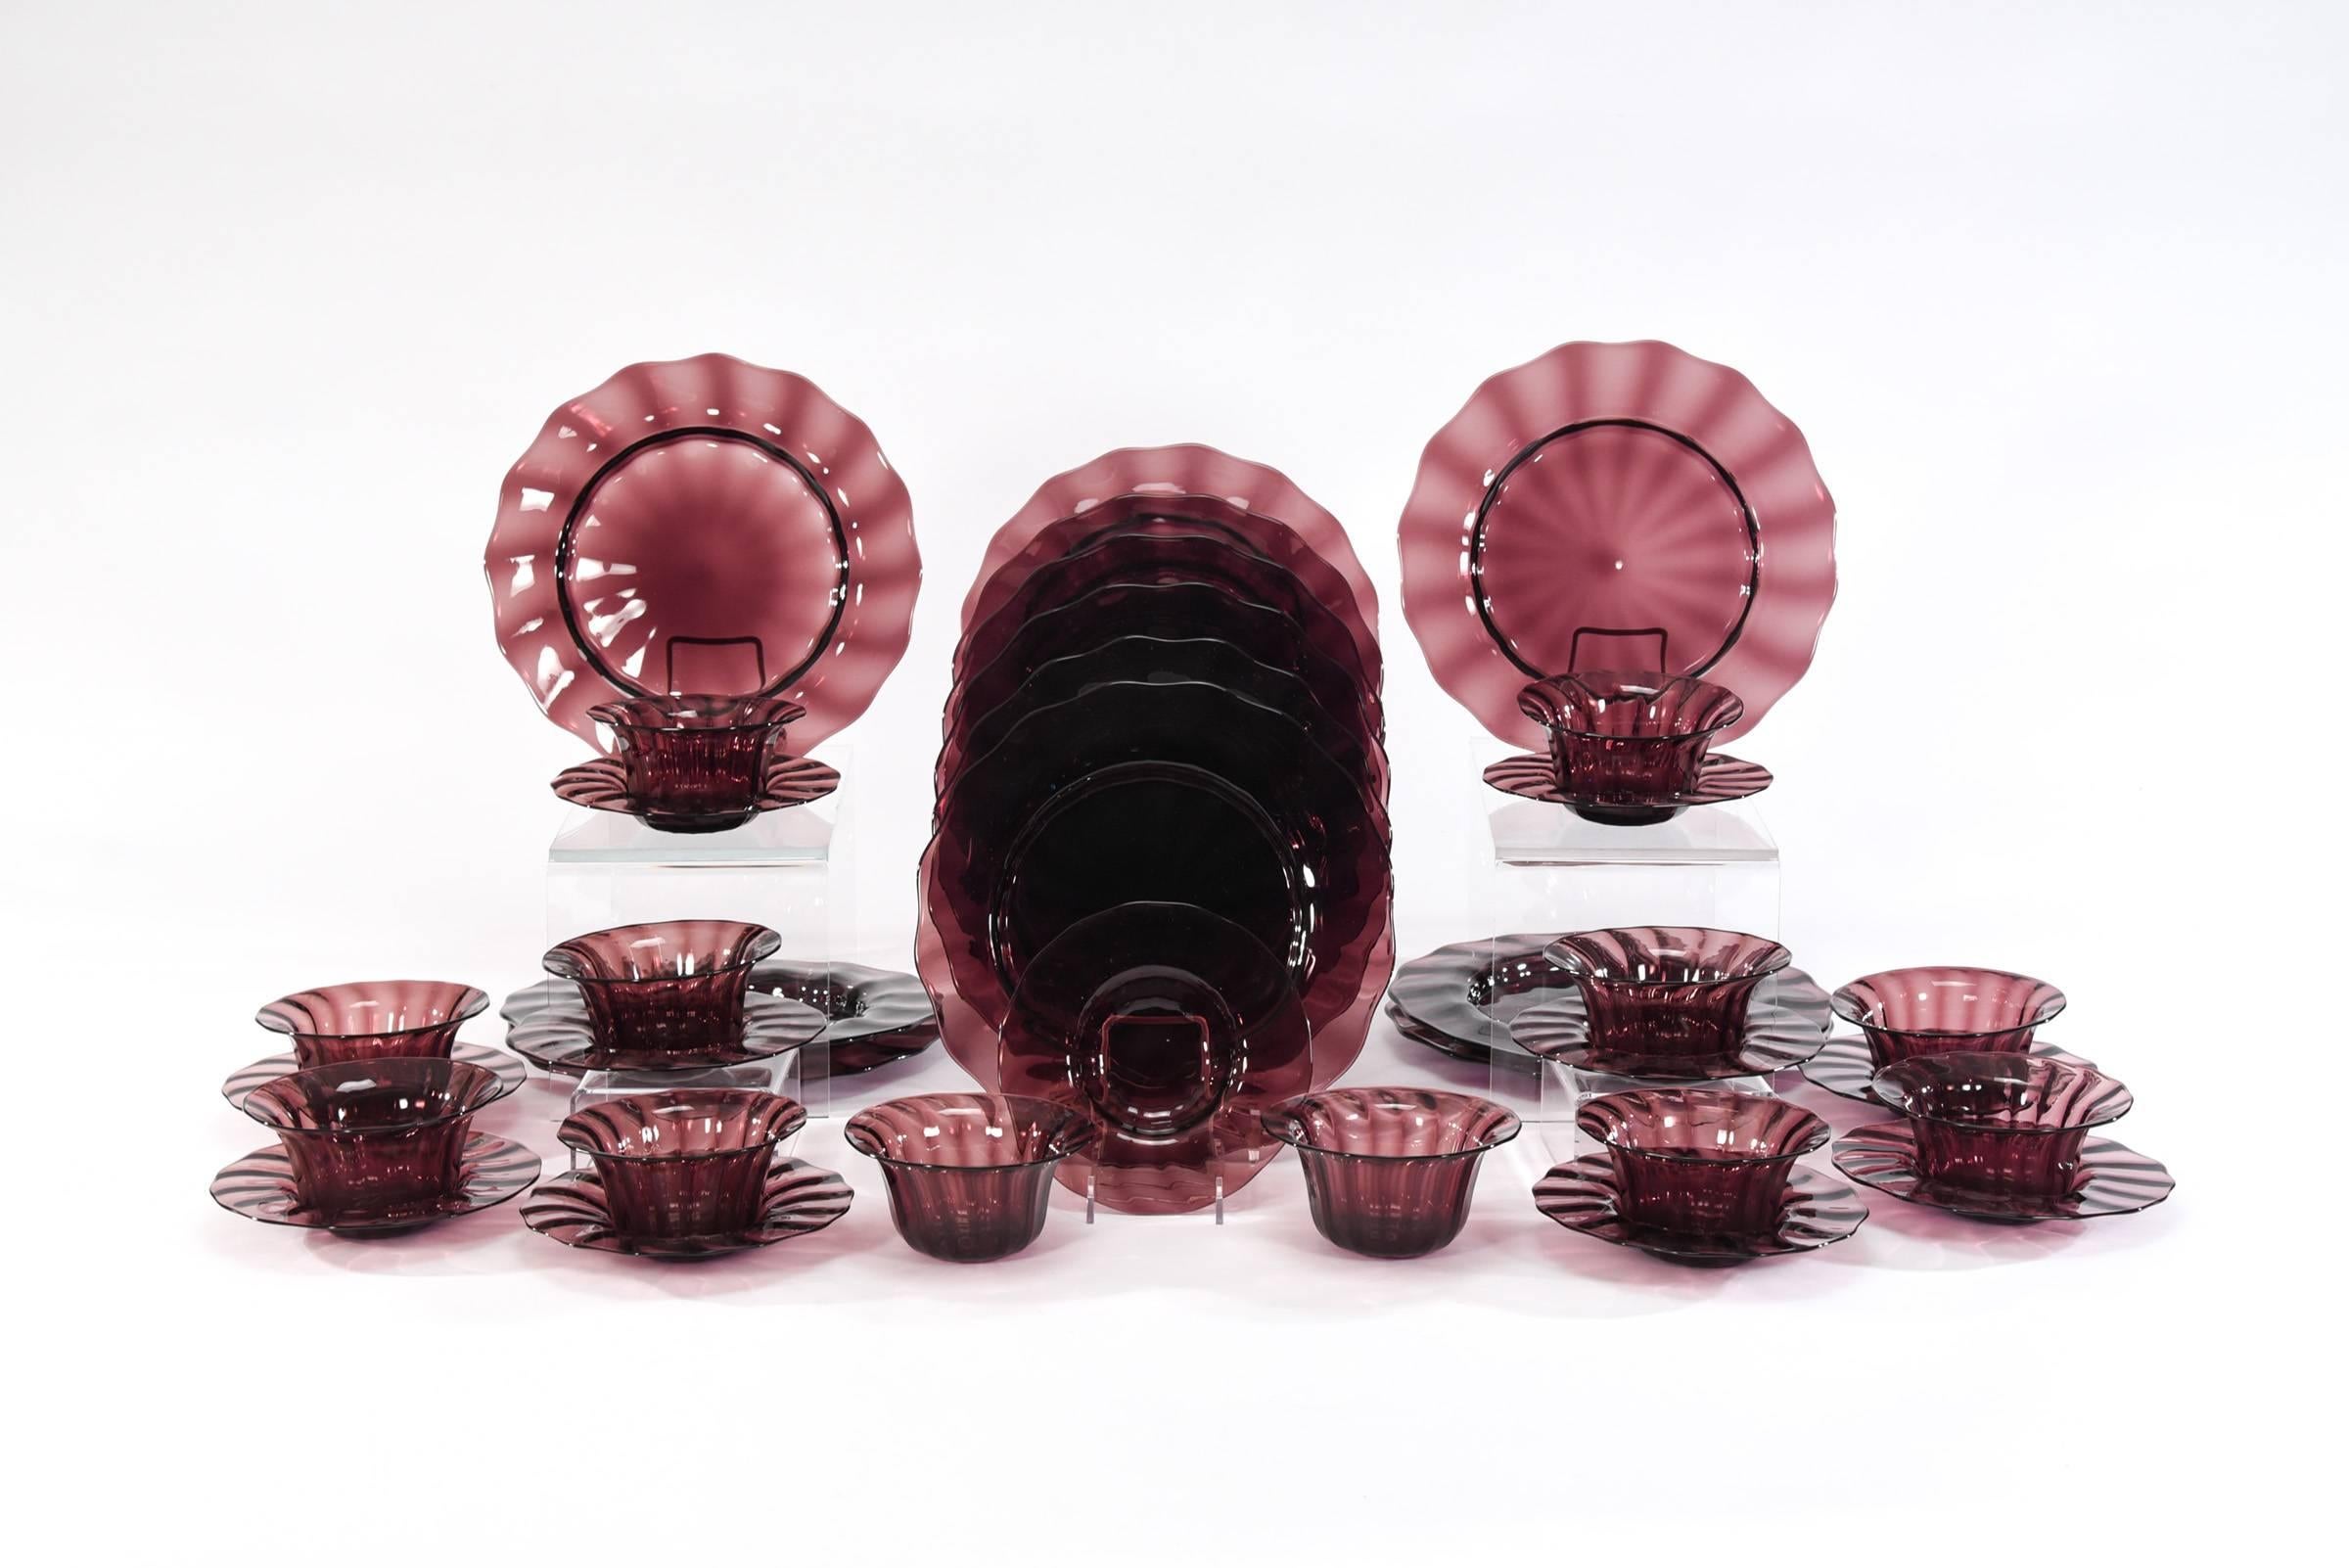 What an amazing collection of Steuben's hand blown amethyst crystal dinner service for 12! All hand blown in the more desirable form of optic ribbing that gives each piece a special quality of subtle wavy ribbing. The set includes large dinner